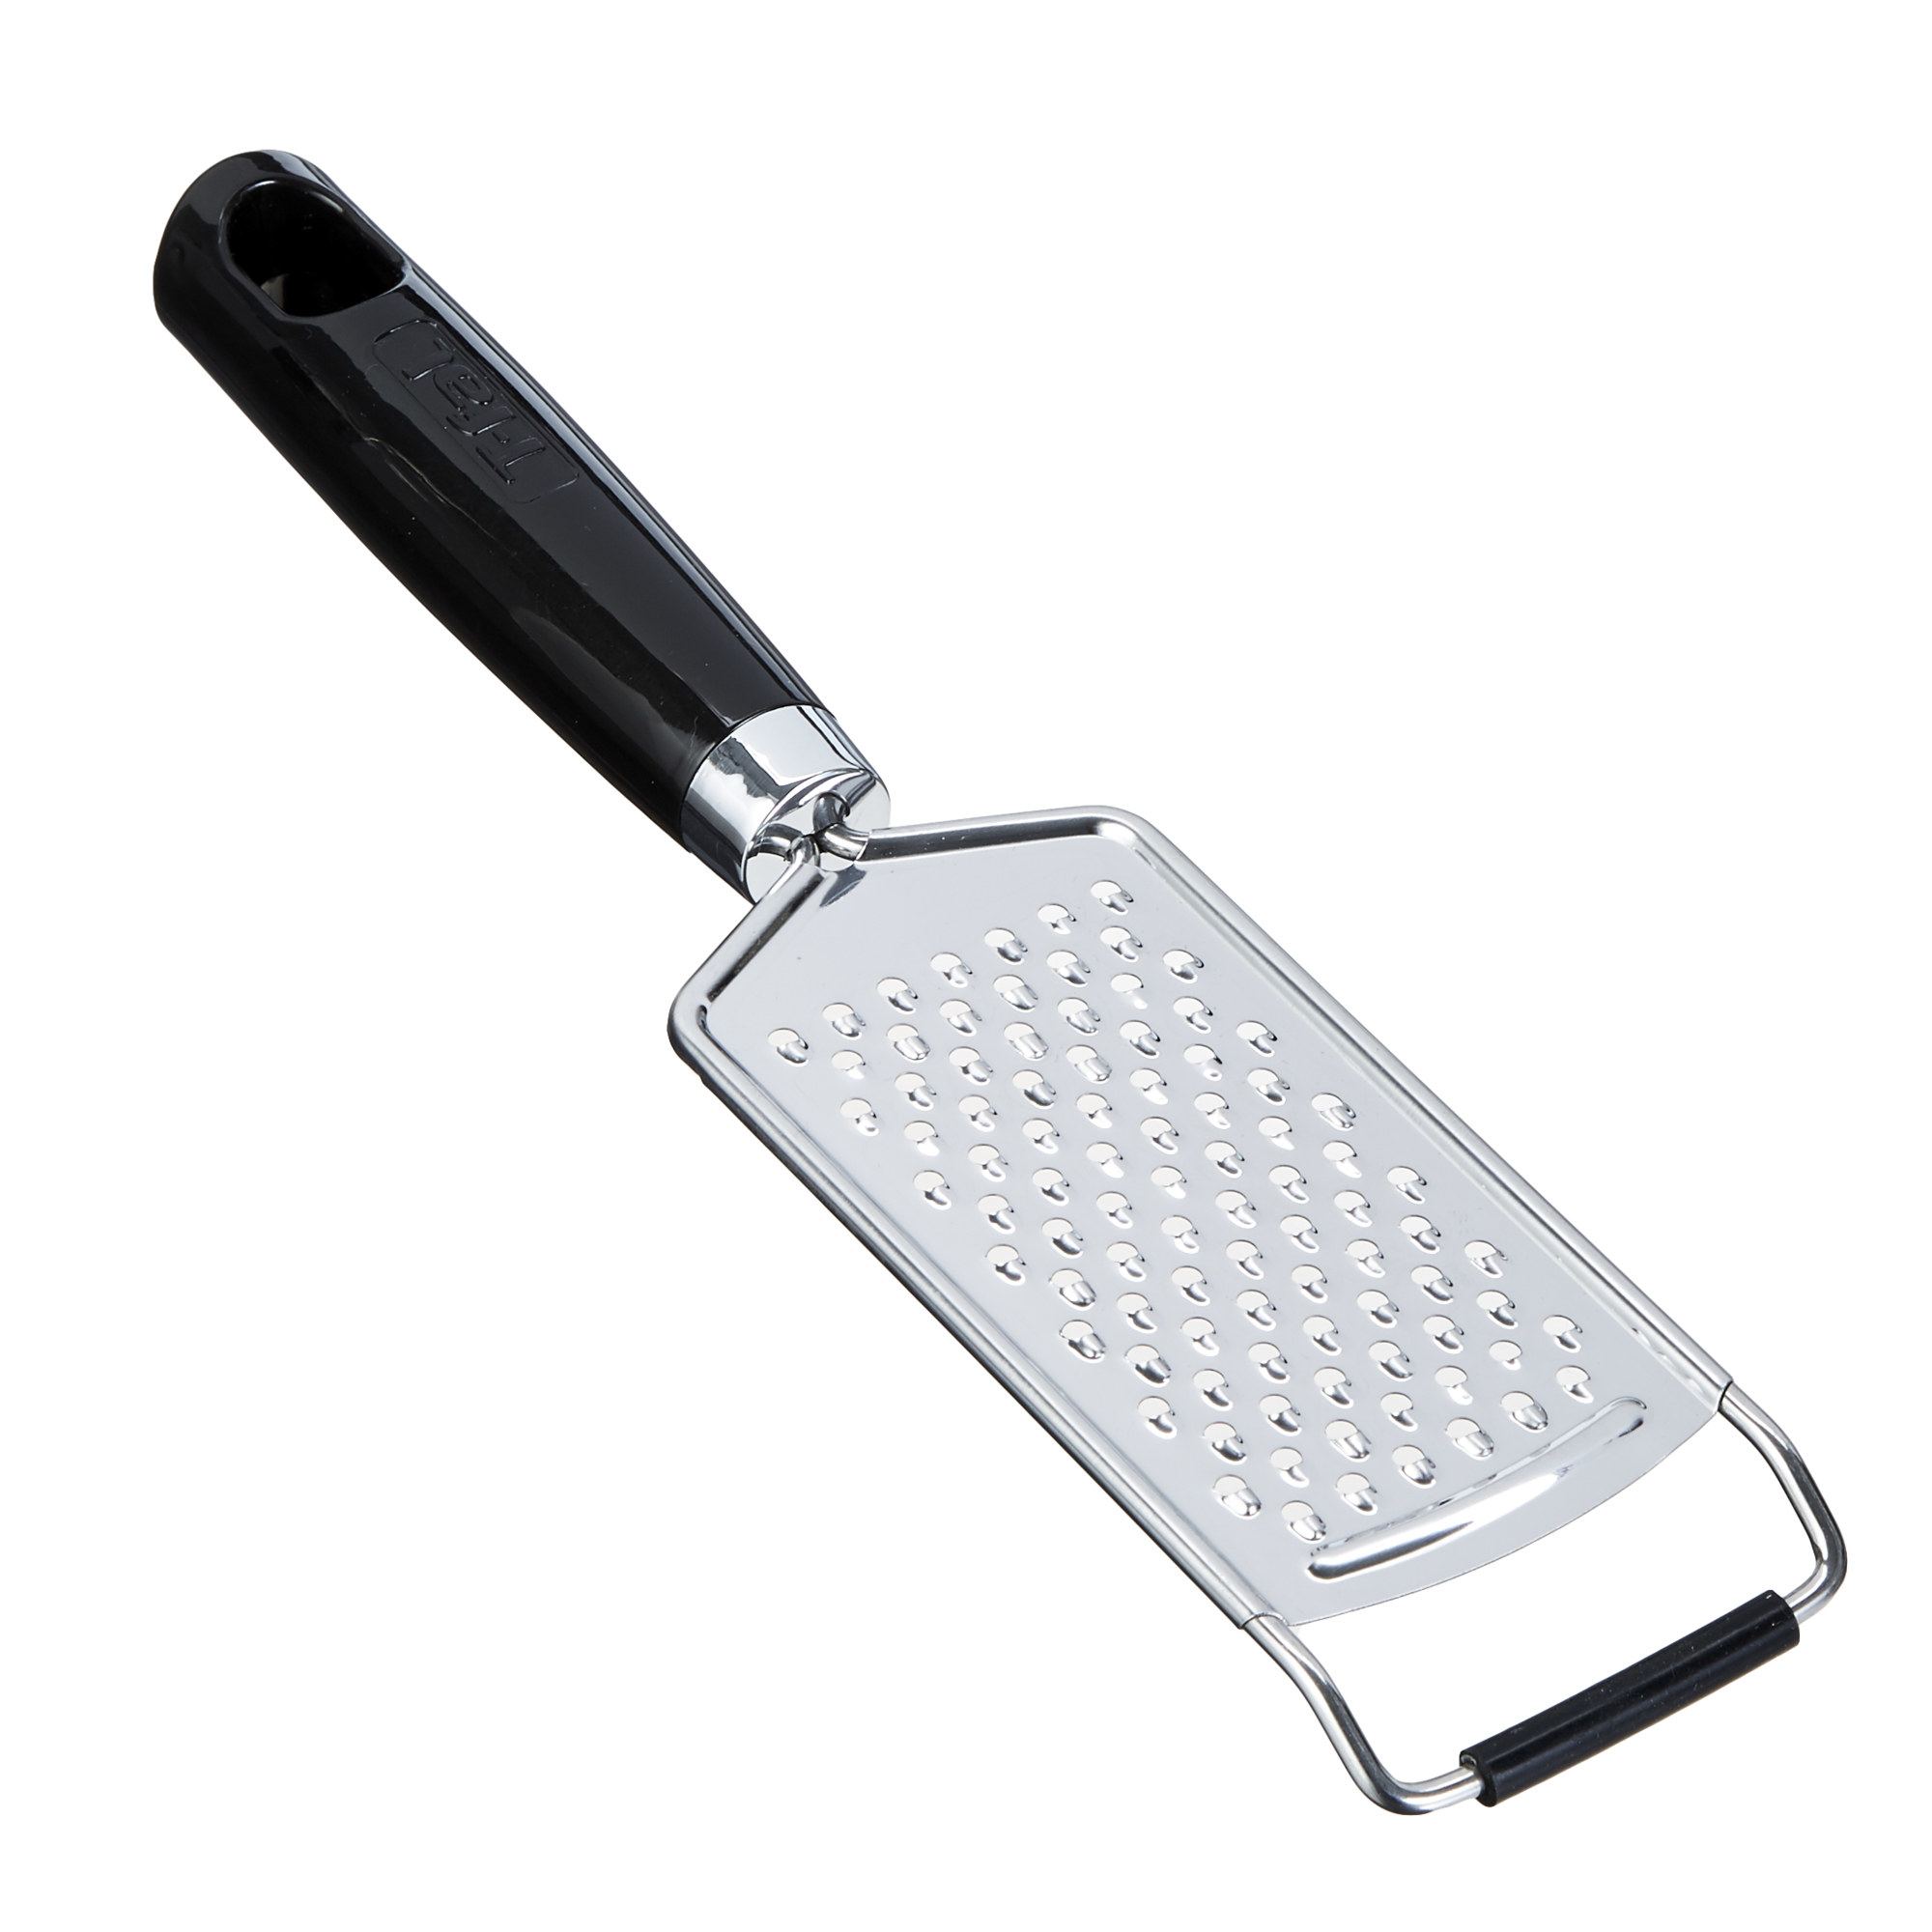 The silver and black grater